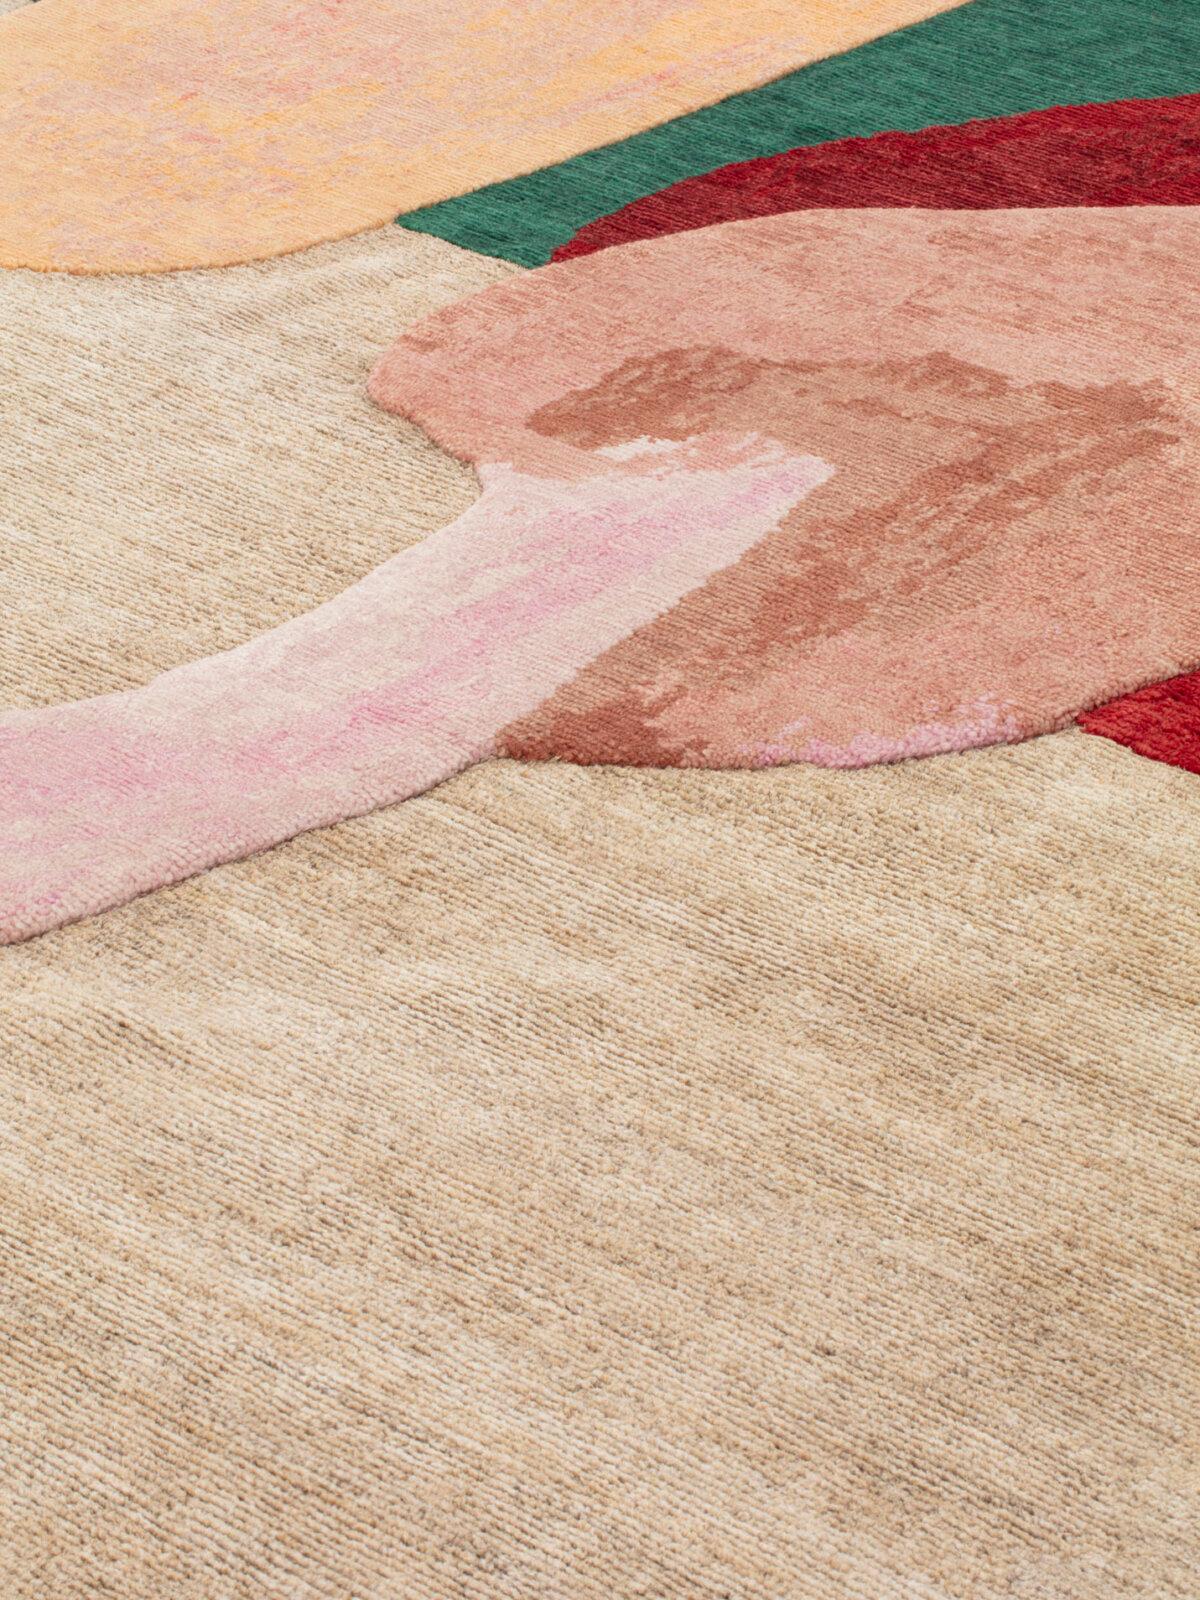 Rude pairs Toogood’s restless experimentation with cc-tapis’
unmatched craftsmanship. “cc-tapis are always up for meeting
my challenges. With “Doodle” we translated the subtle, painterly
gestures of artworks on paper into wool. With “Inventory”